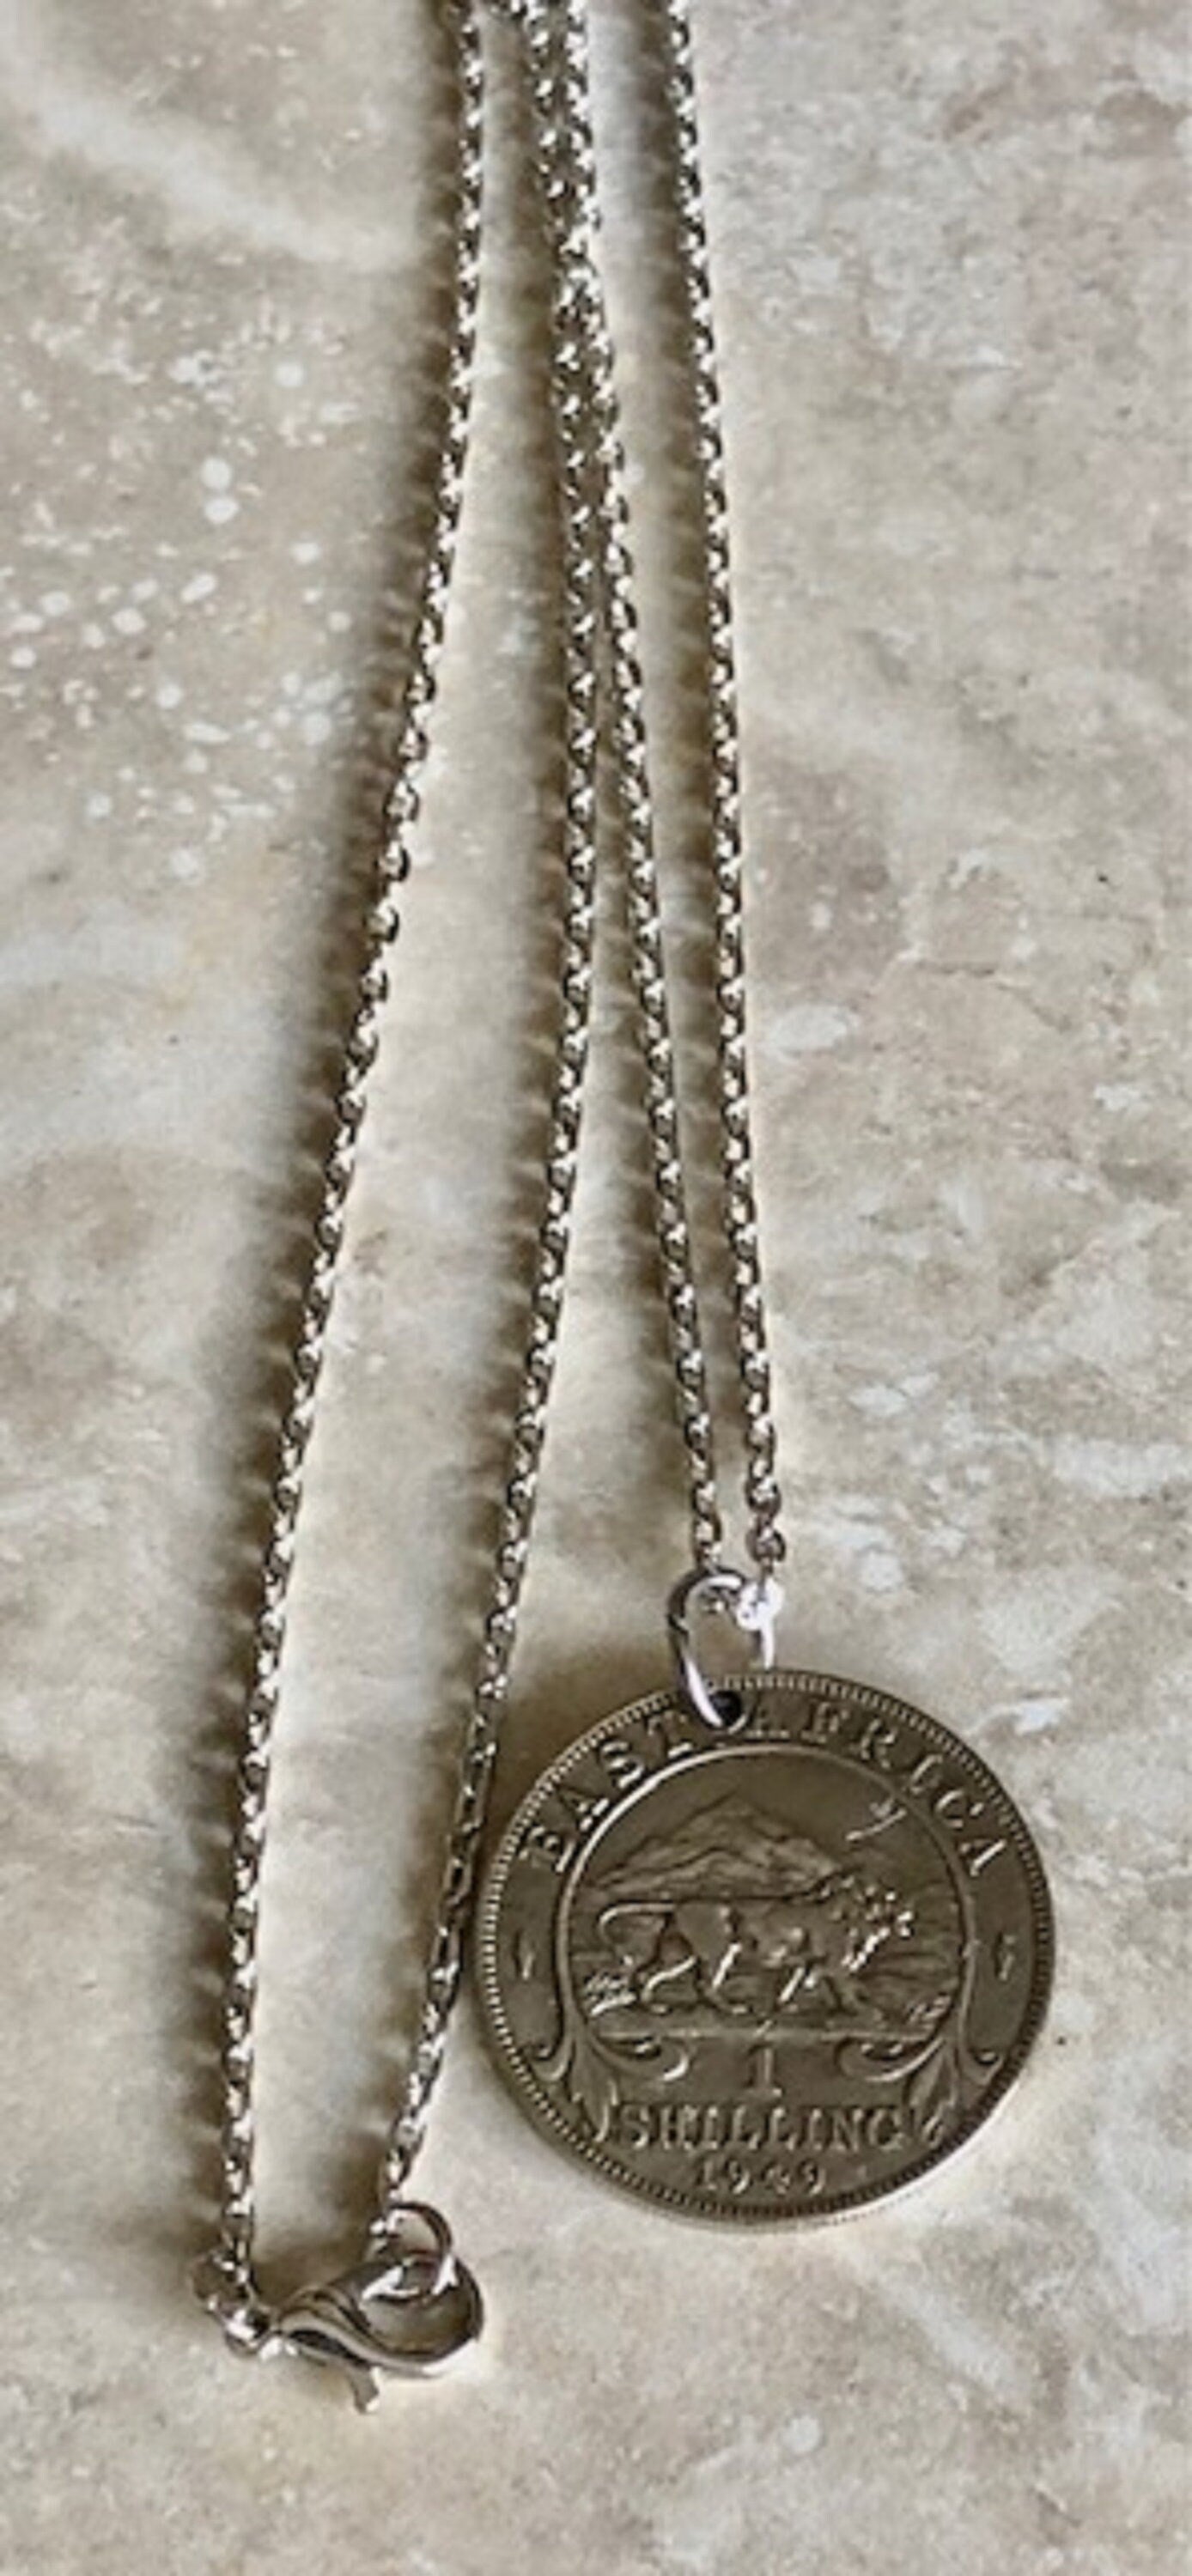 East Africa Coin Necklace 1 Shilling African Personal Necklace Handmade Jewelry Gift Friend Charm For Him Her World Coin Collector